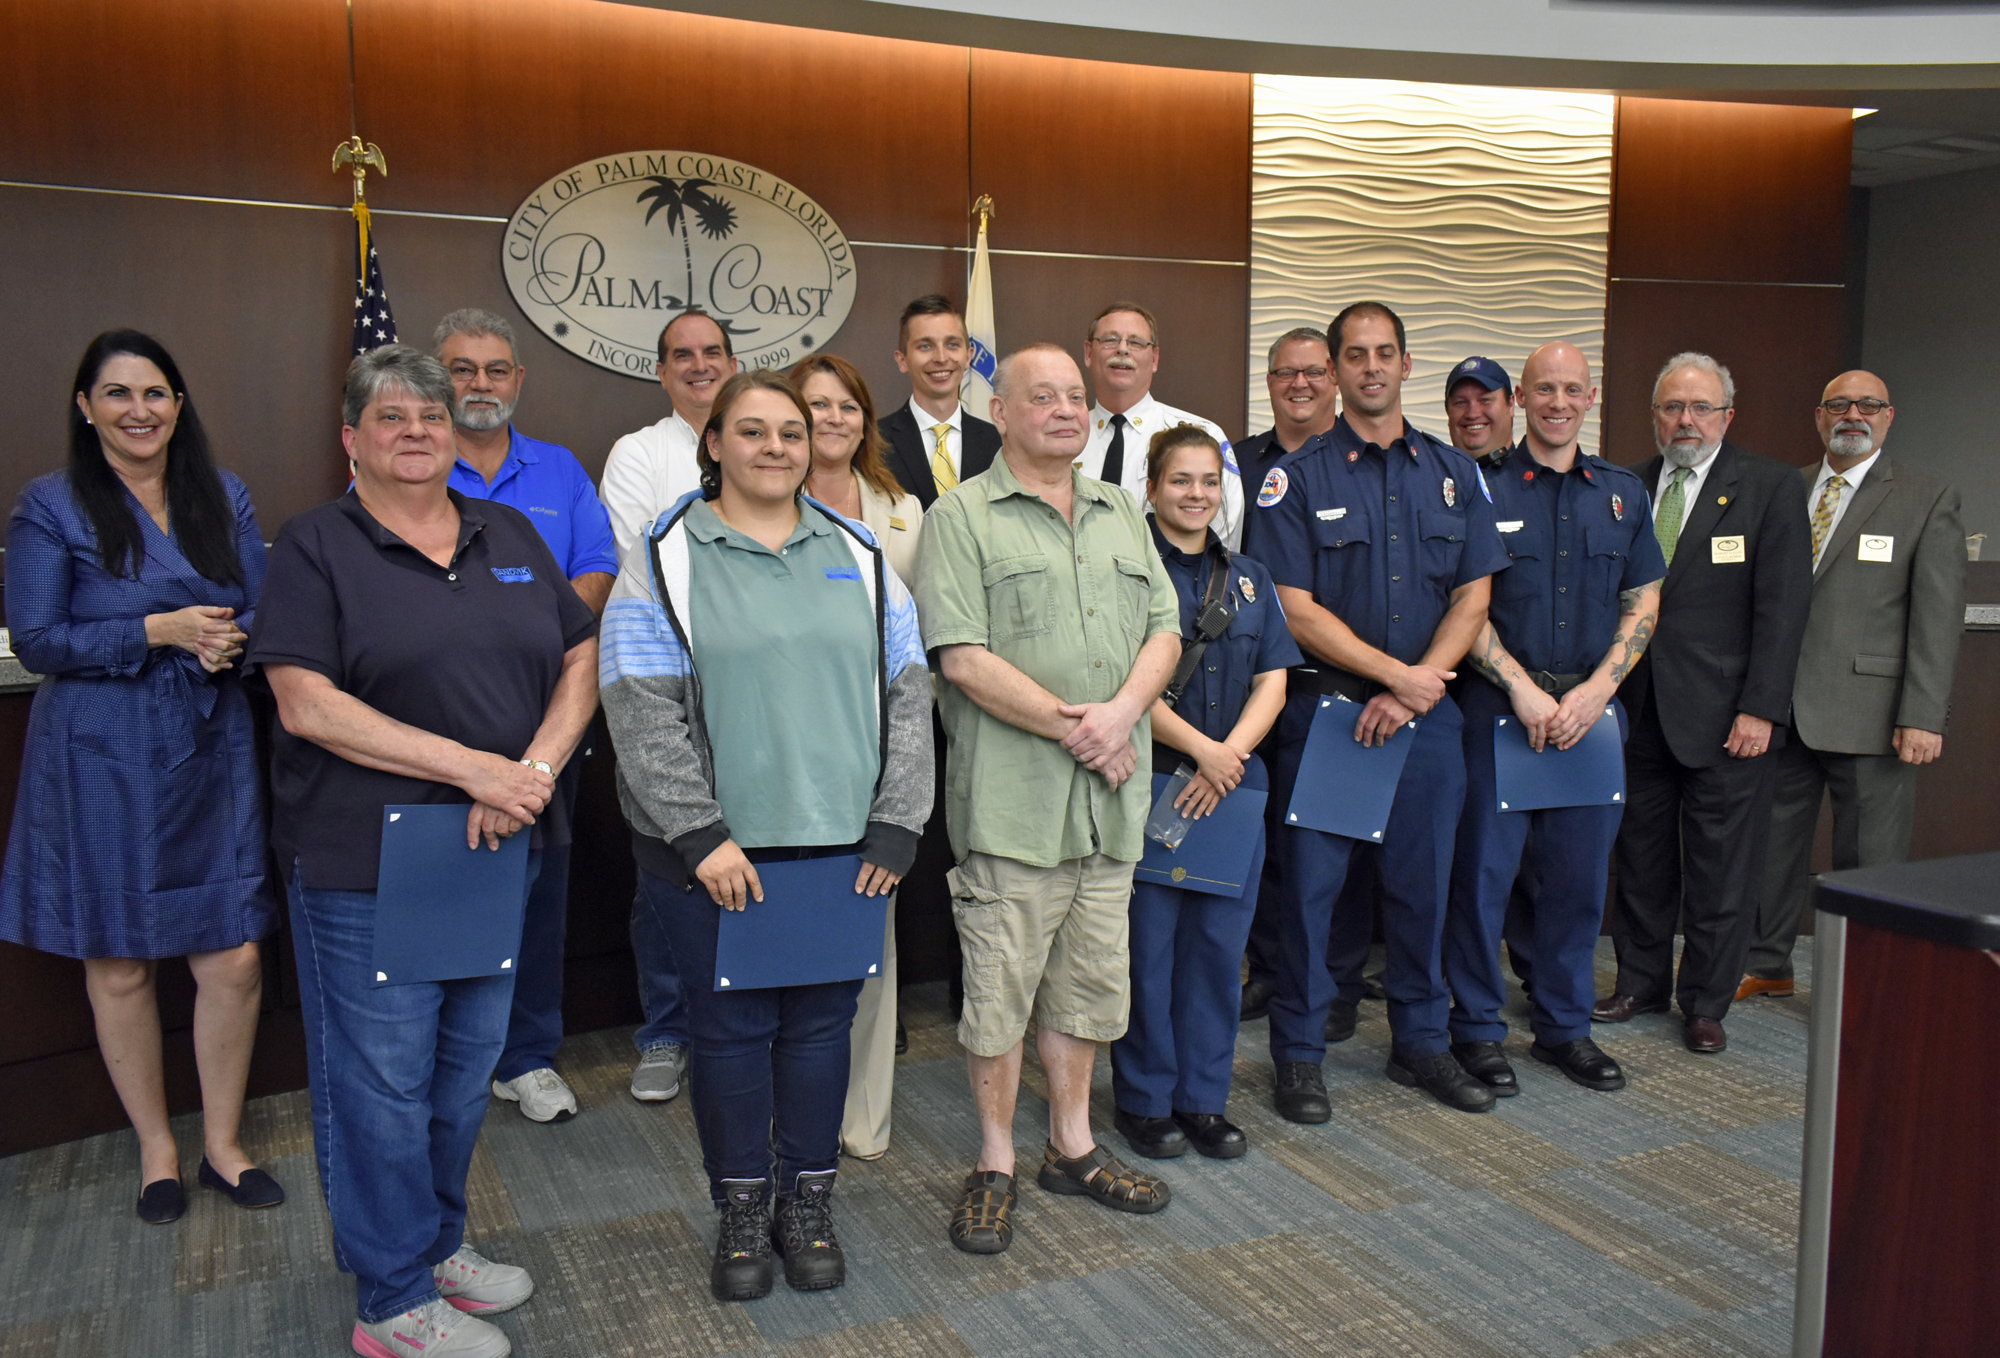 Palm Coast resident Serge Judro, center, attended the Palm Coast City Council meeting April 3 to help honor the Palm Coast Fire Engine 21 crew and Judro’s coworkers for their roles in saving his life. Photo courtesy of Cindi Lane